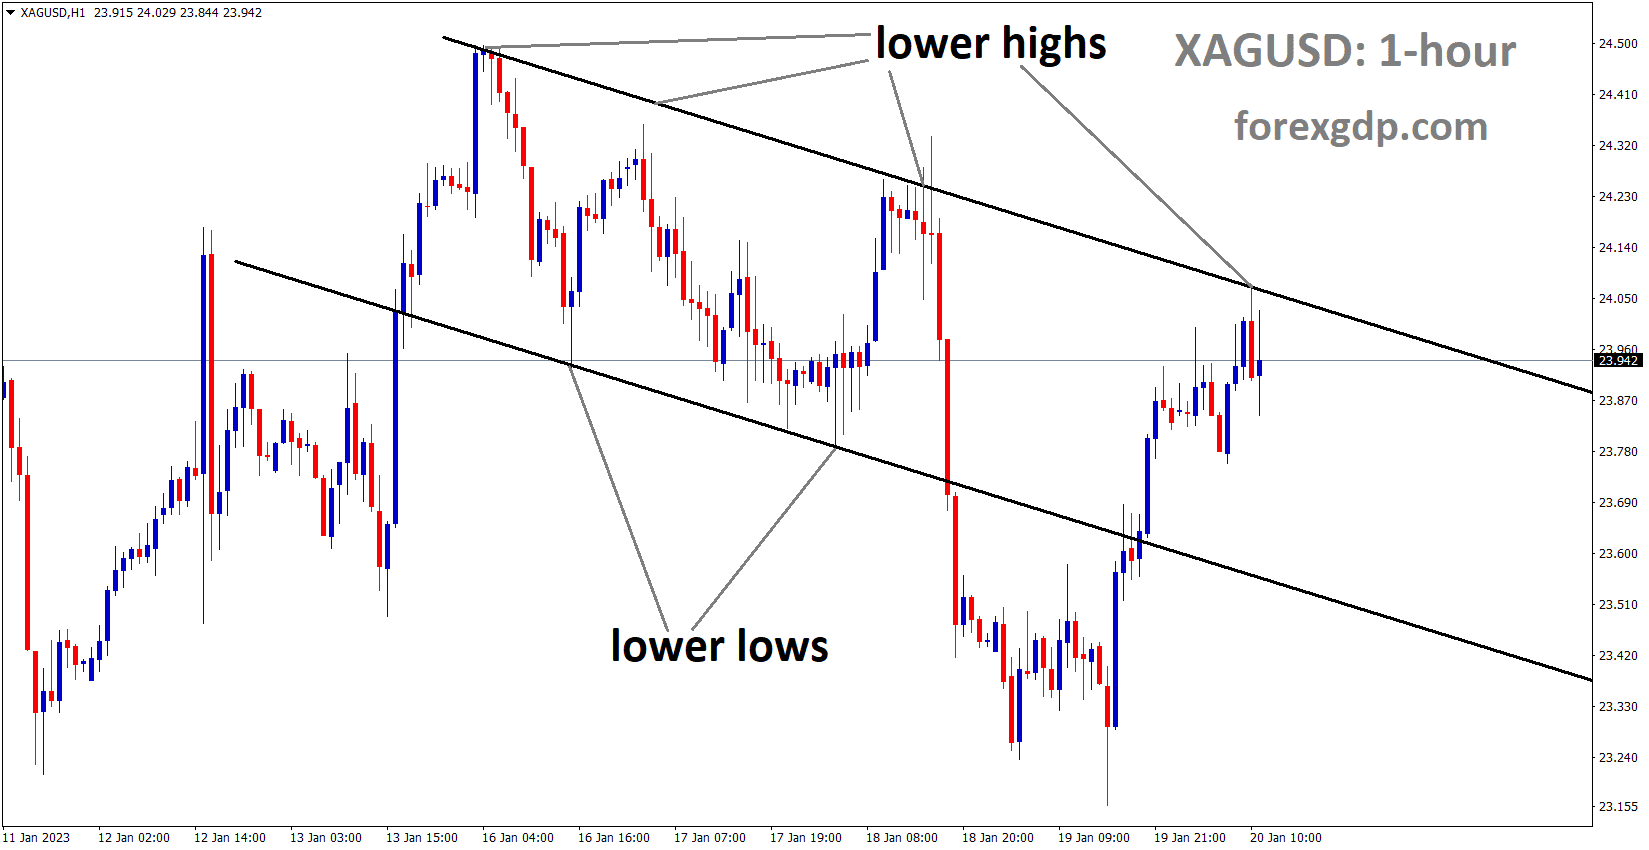 XAGUSD Silver Price is moving in the Descending channel and the market has reached the lower high area of the channel.